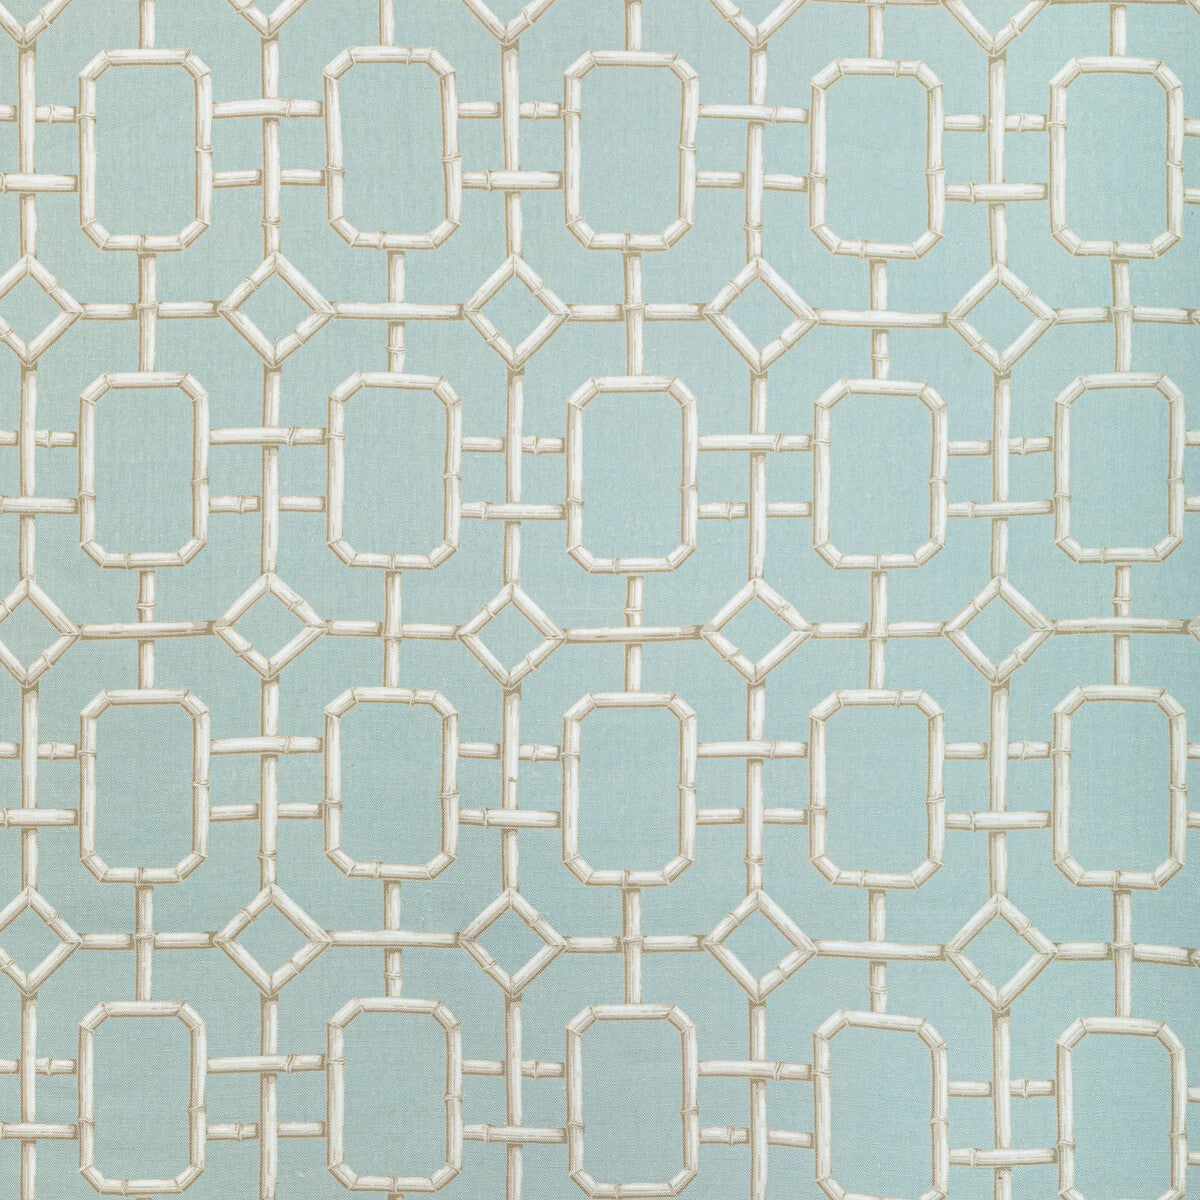 Bambu Fret fabric in delft color - pattern BAMBU FRET.516.0 - by Kravet Couture in the Jan Showers Charmant collection